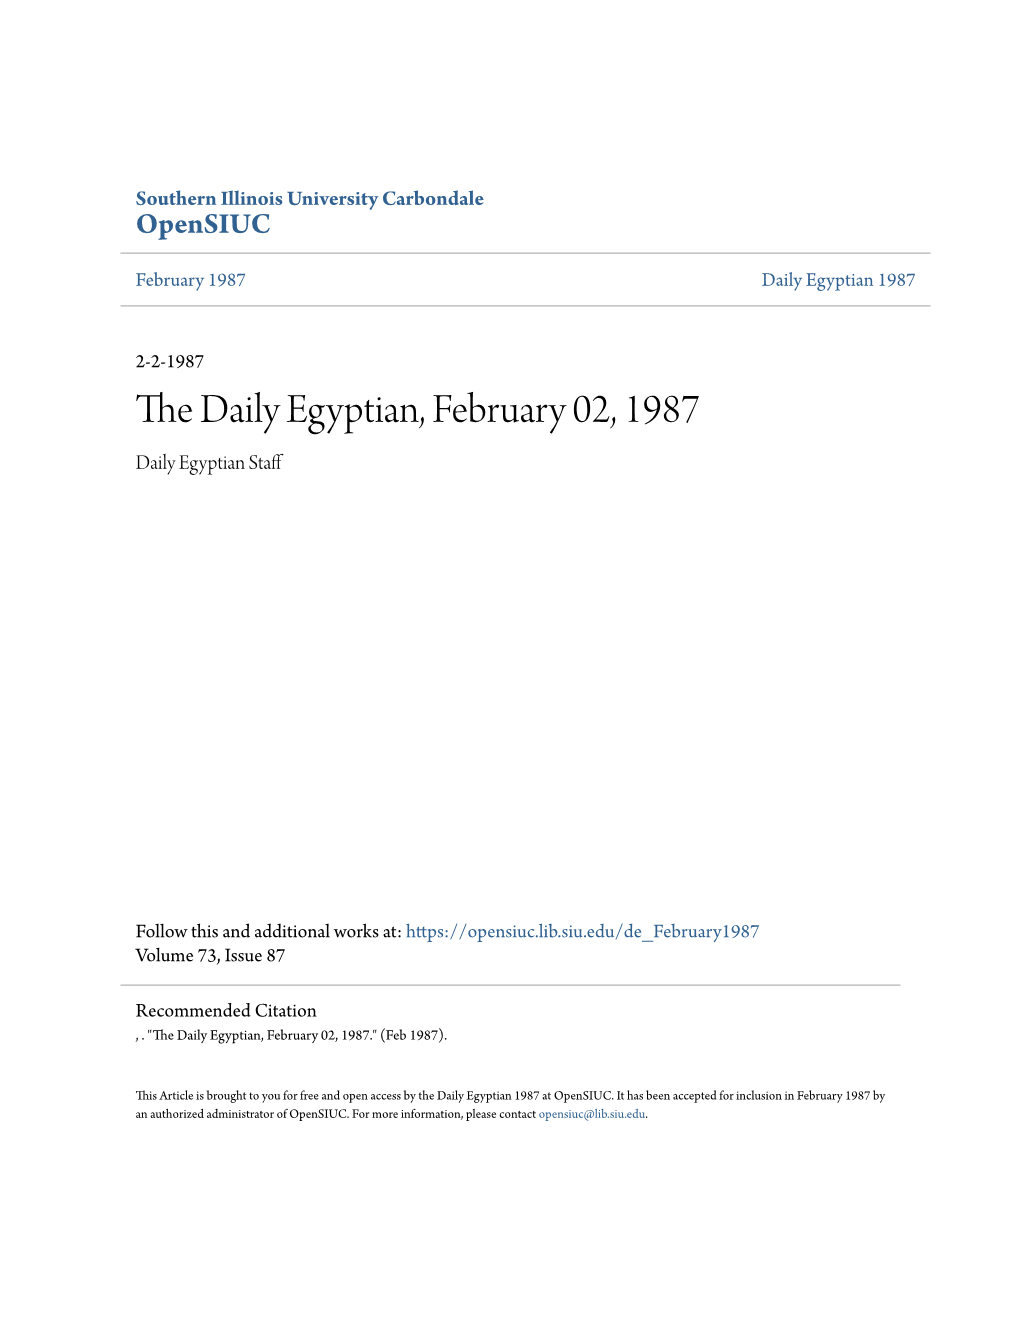 The Daily Egyptian, February 02, 1987